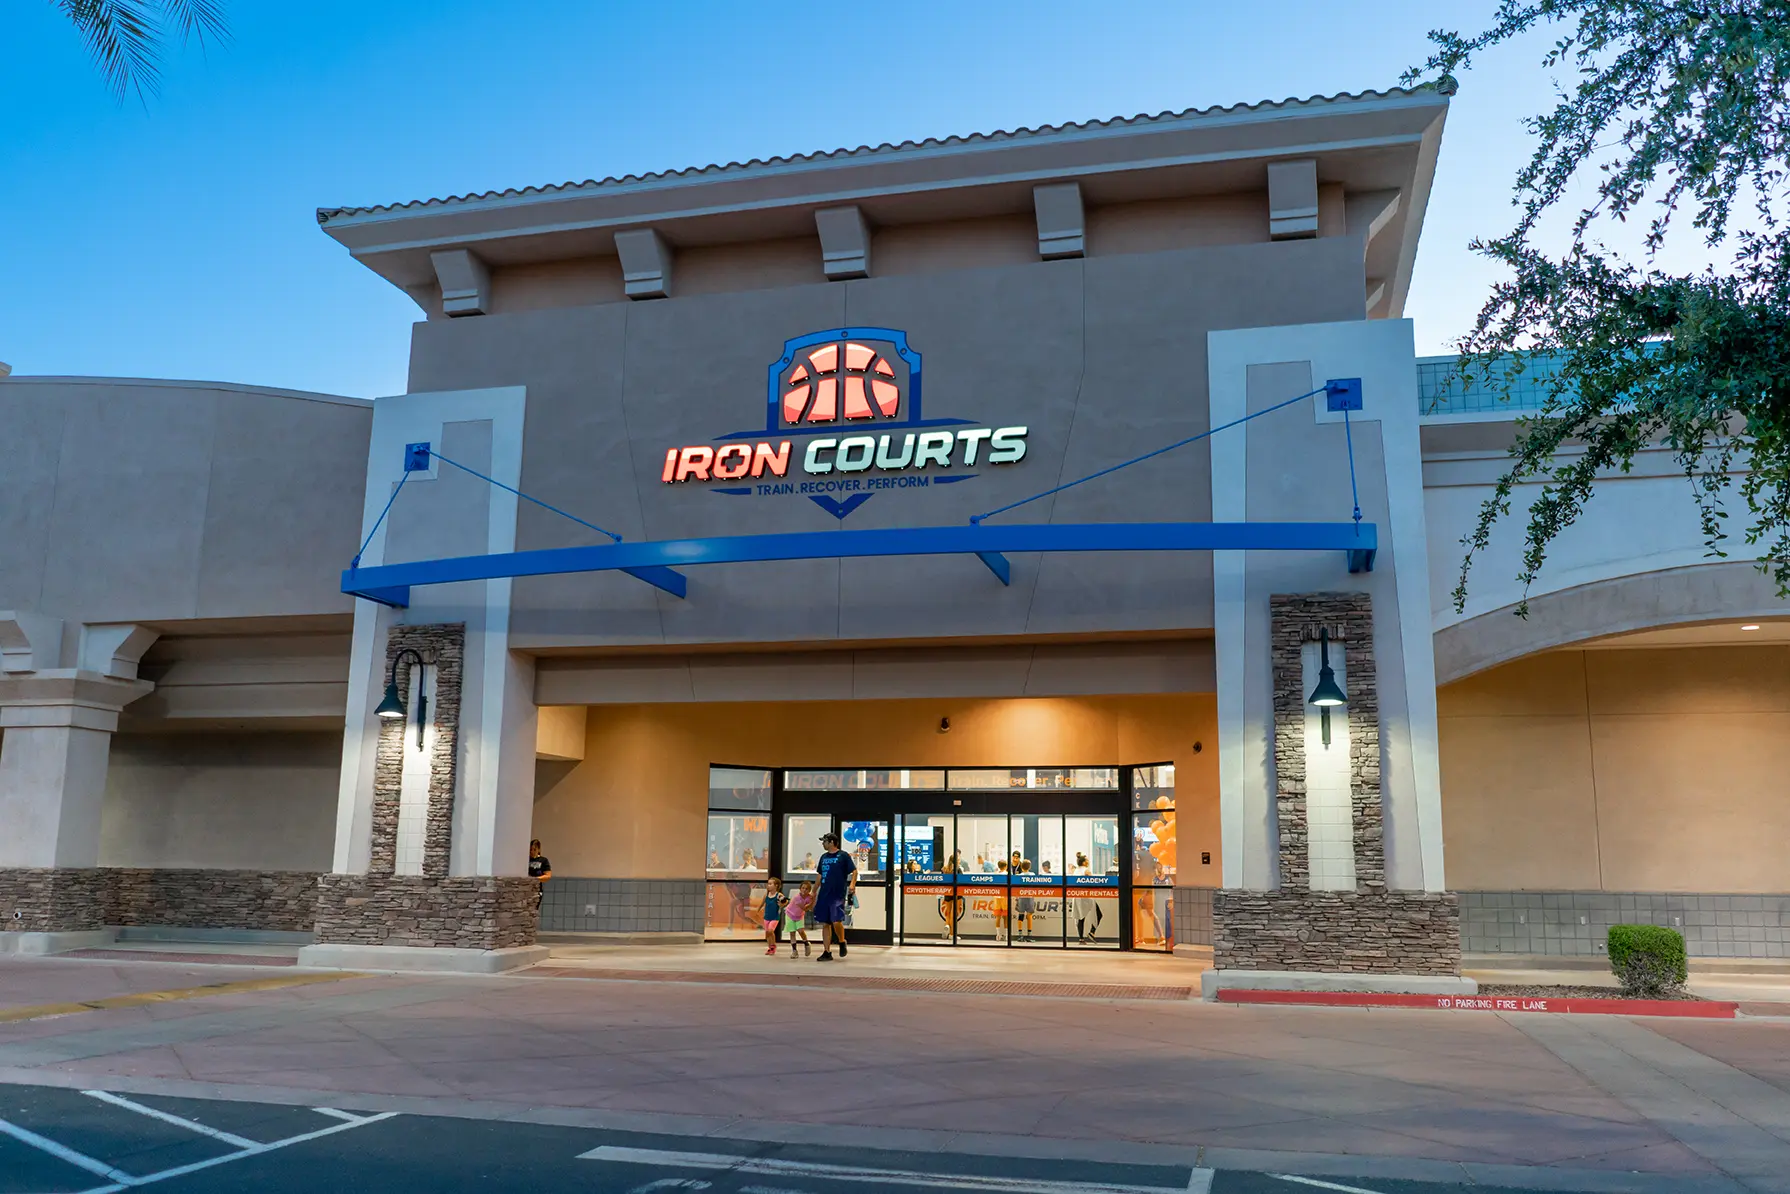 Ironcourts basketball leagues in Gilbert